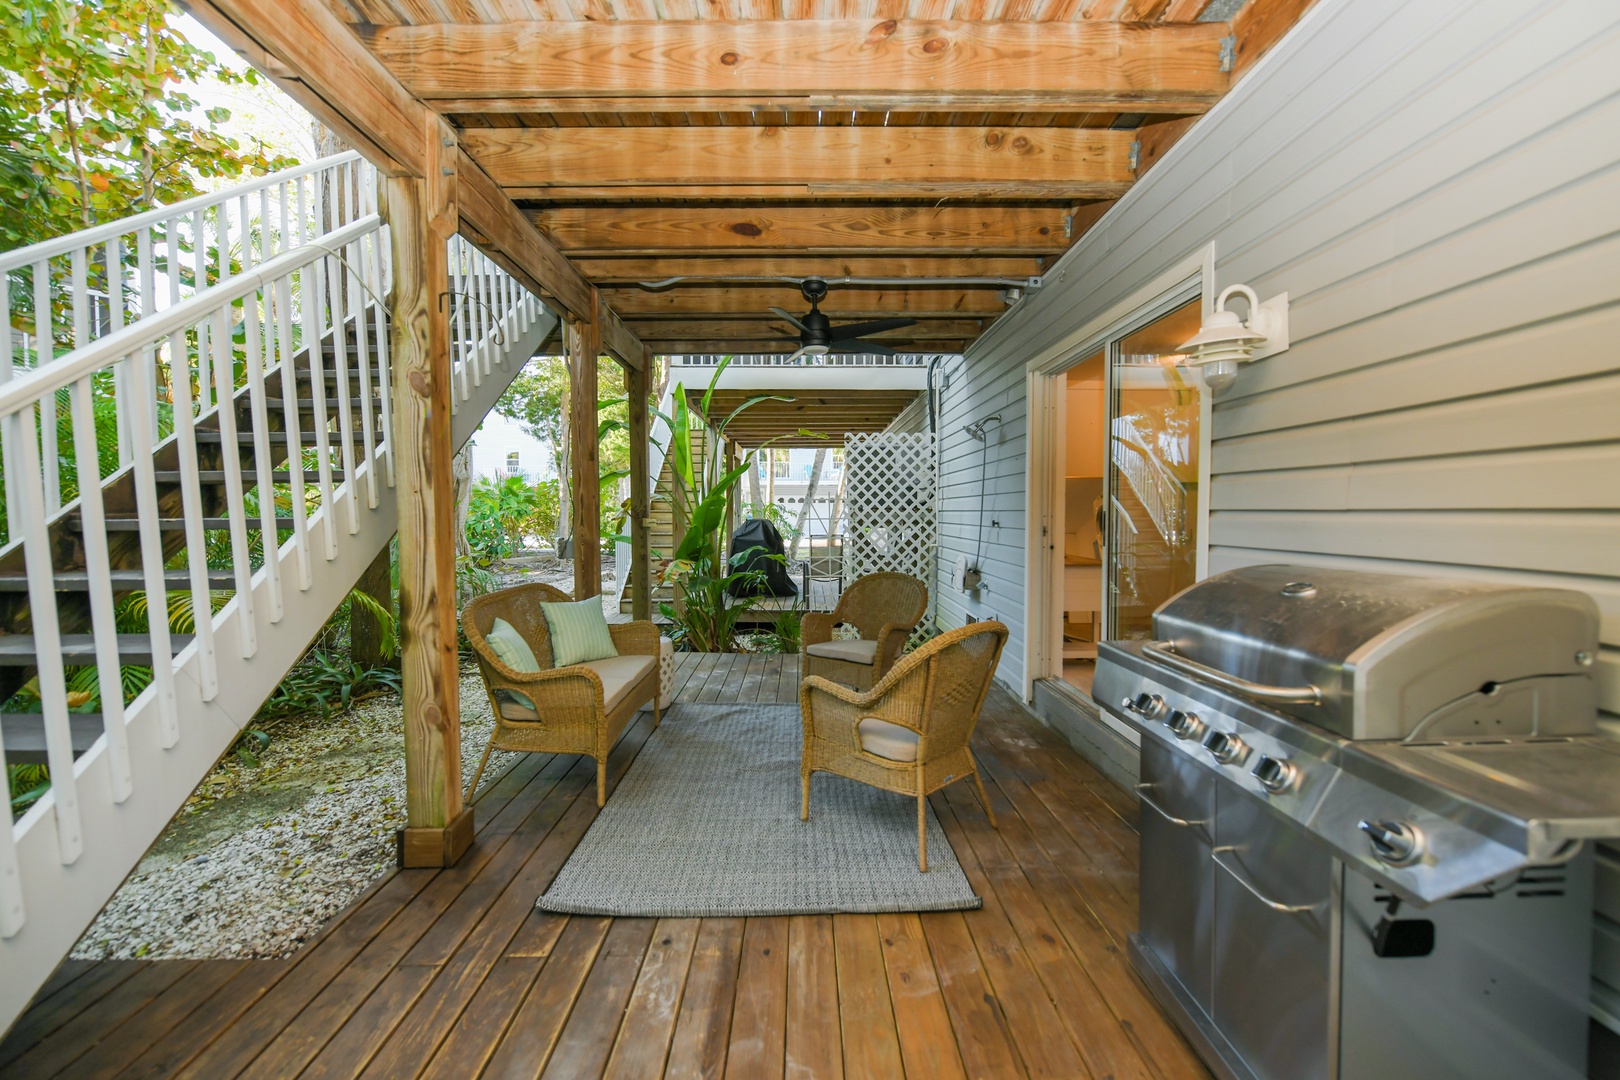 Outdoor Sitting Area - BBQ Grill